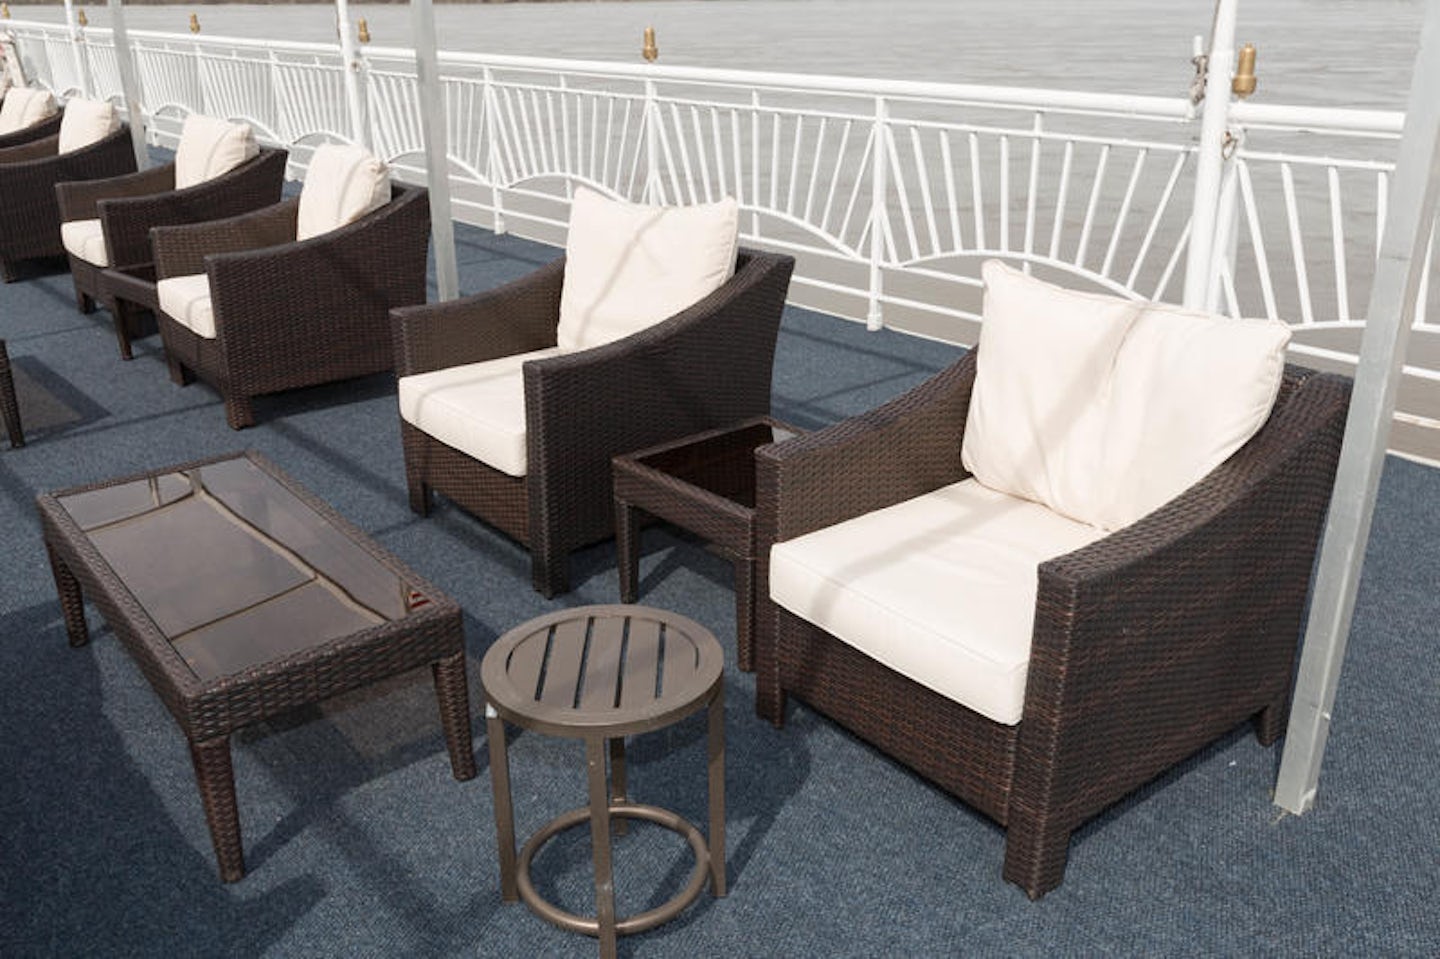 The Sun Deck on American Queen